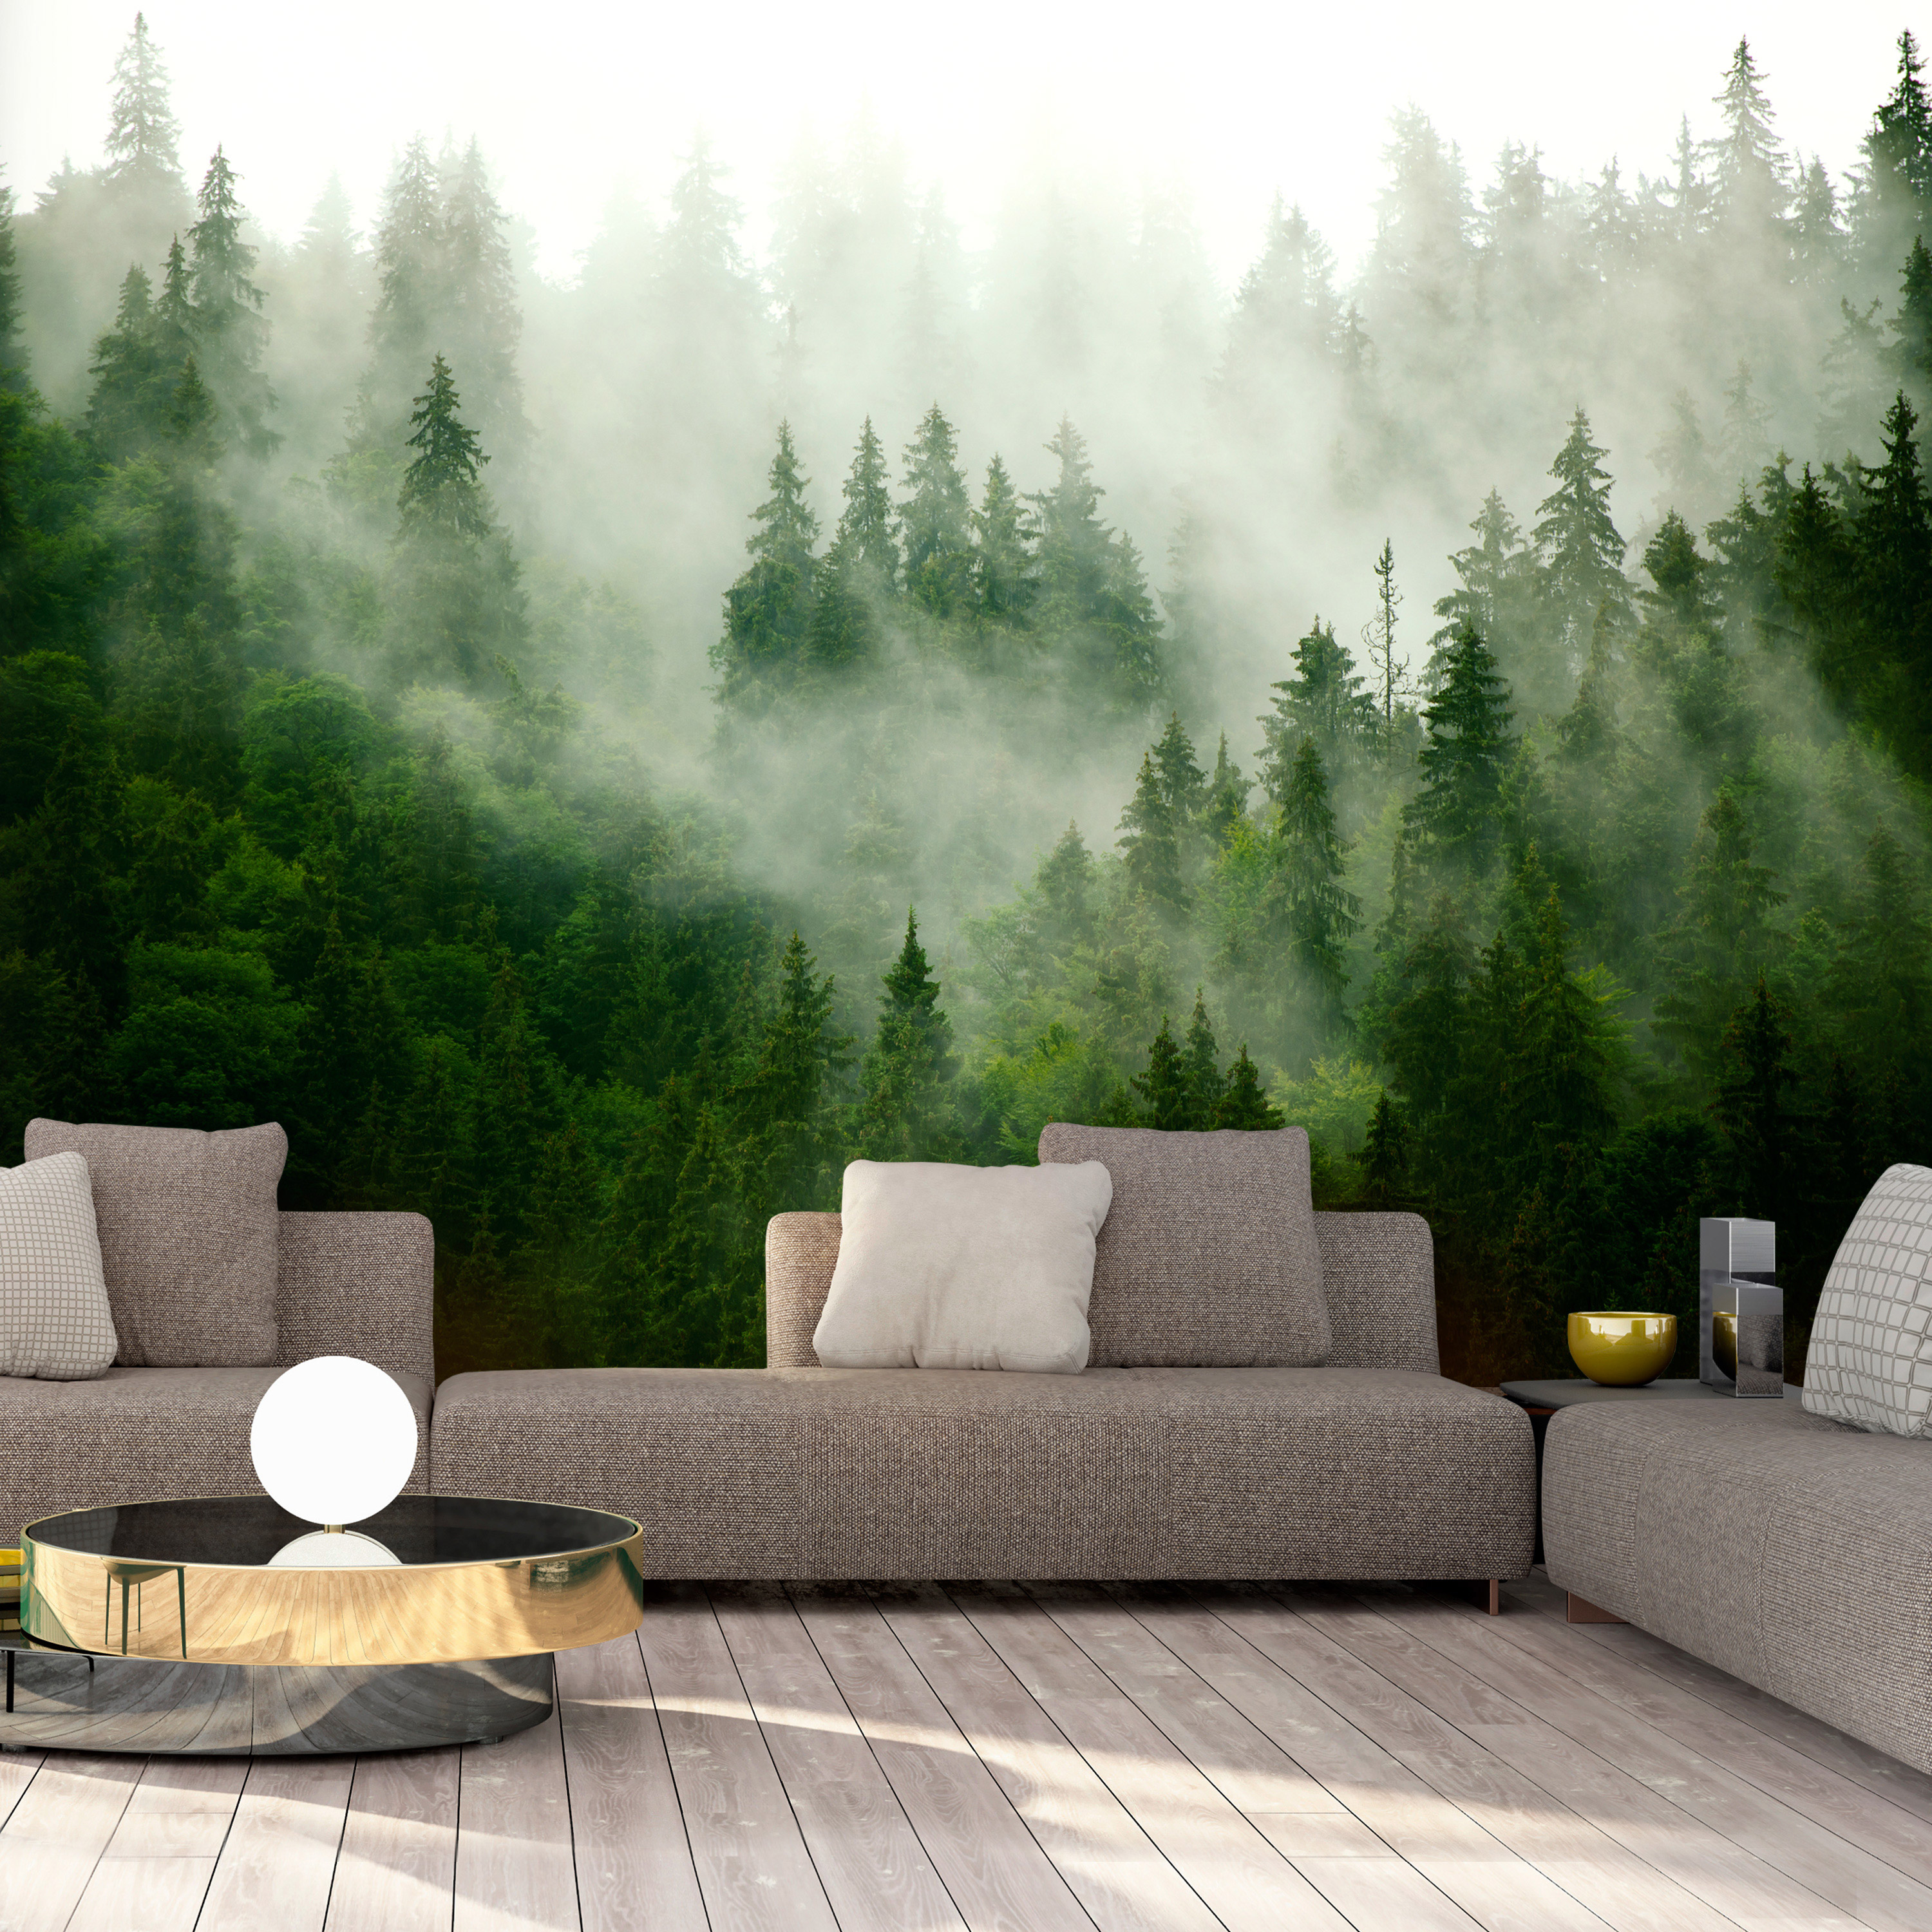 Self-adhesive Wallpaper - Mountain Forest (Green) - 392x280